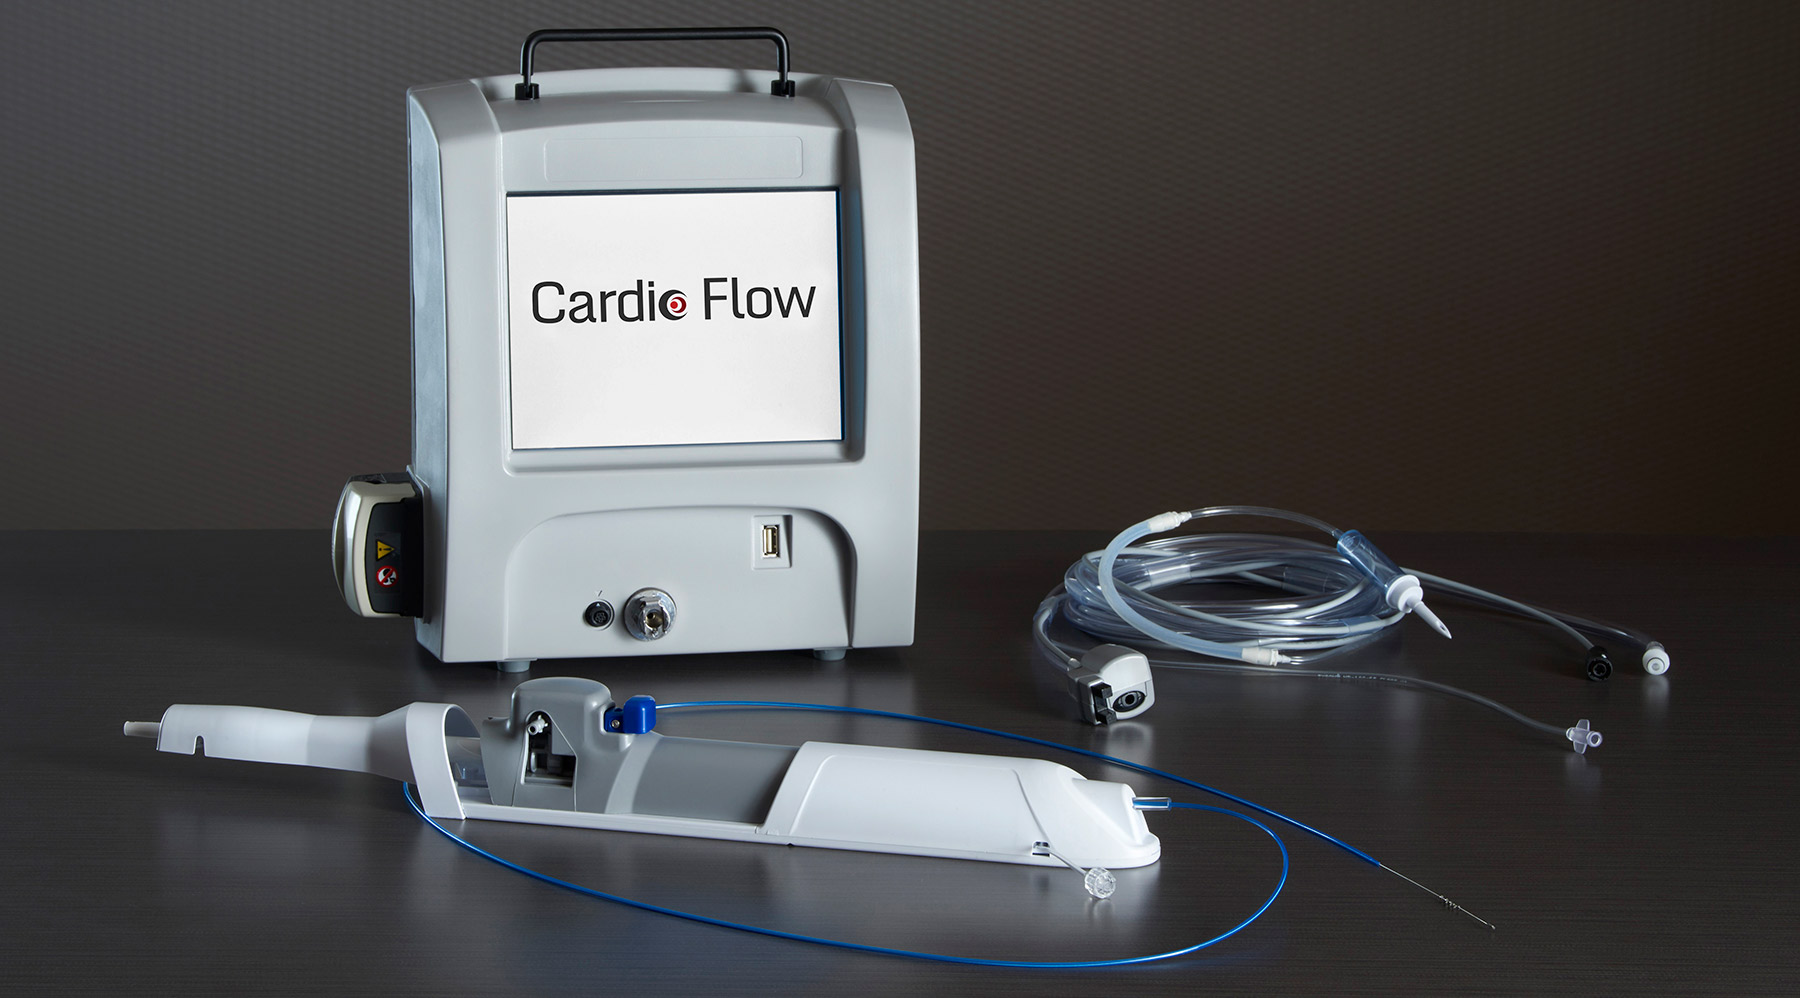 Cardio Flow secures funding for device that removes plaque from arteries.